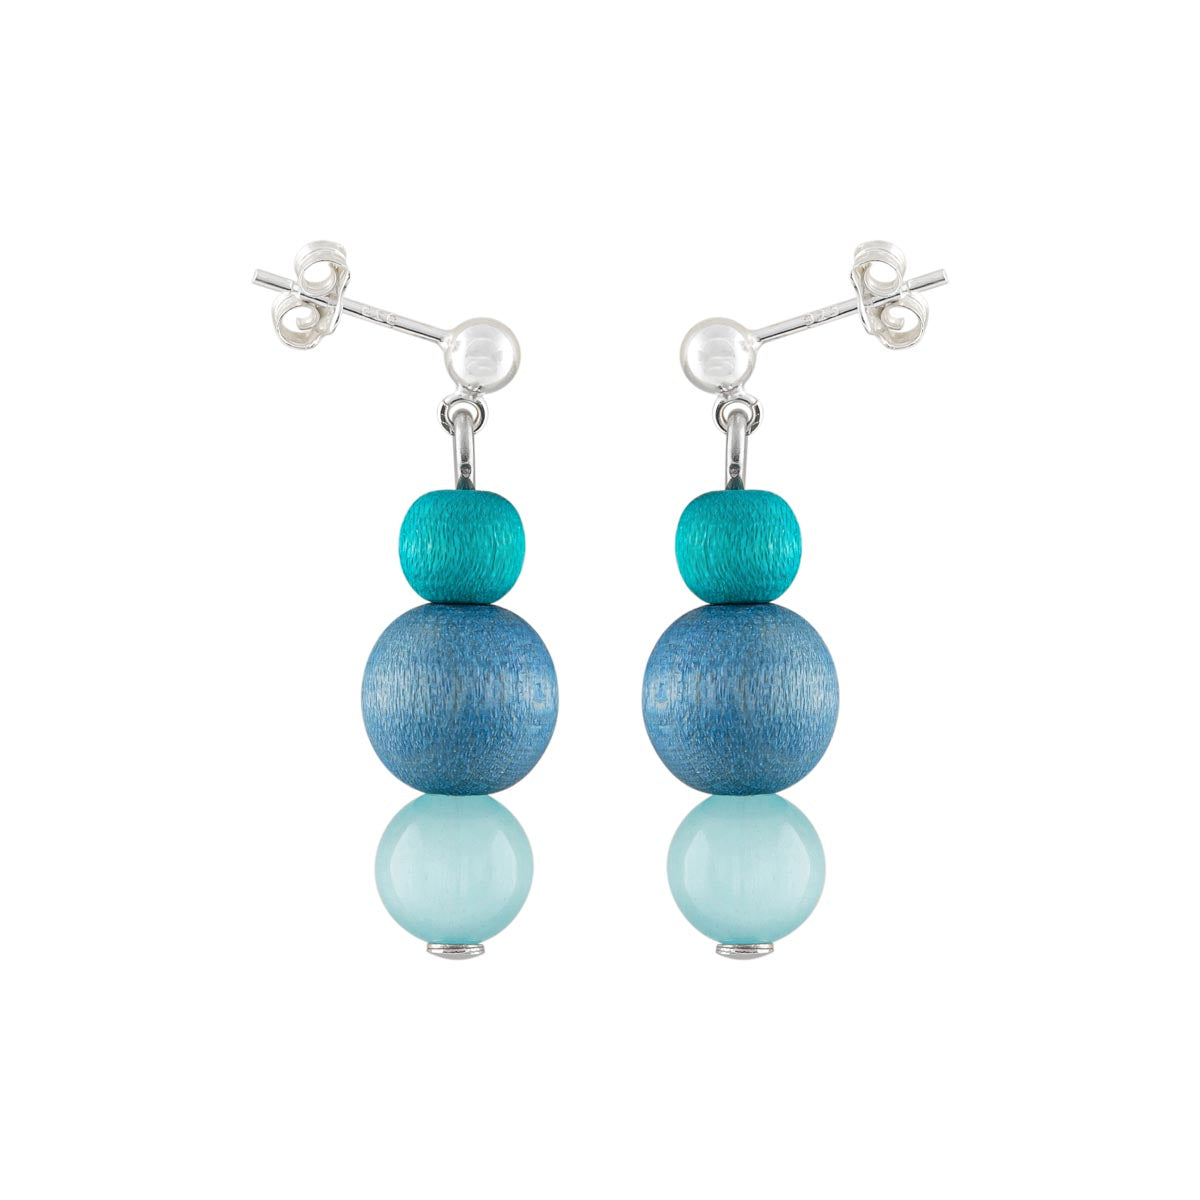 Irene earrings, blue and turquoise